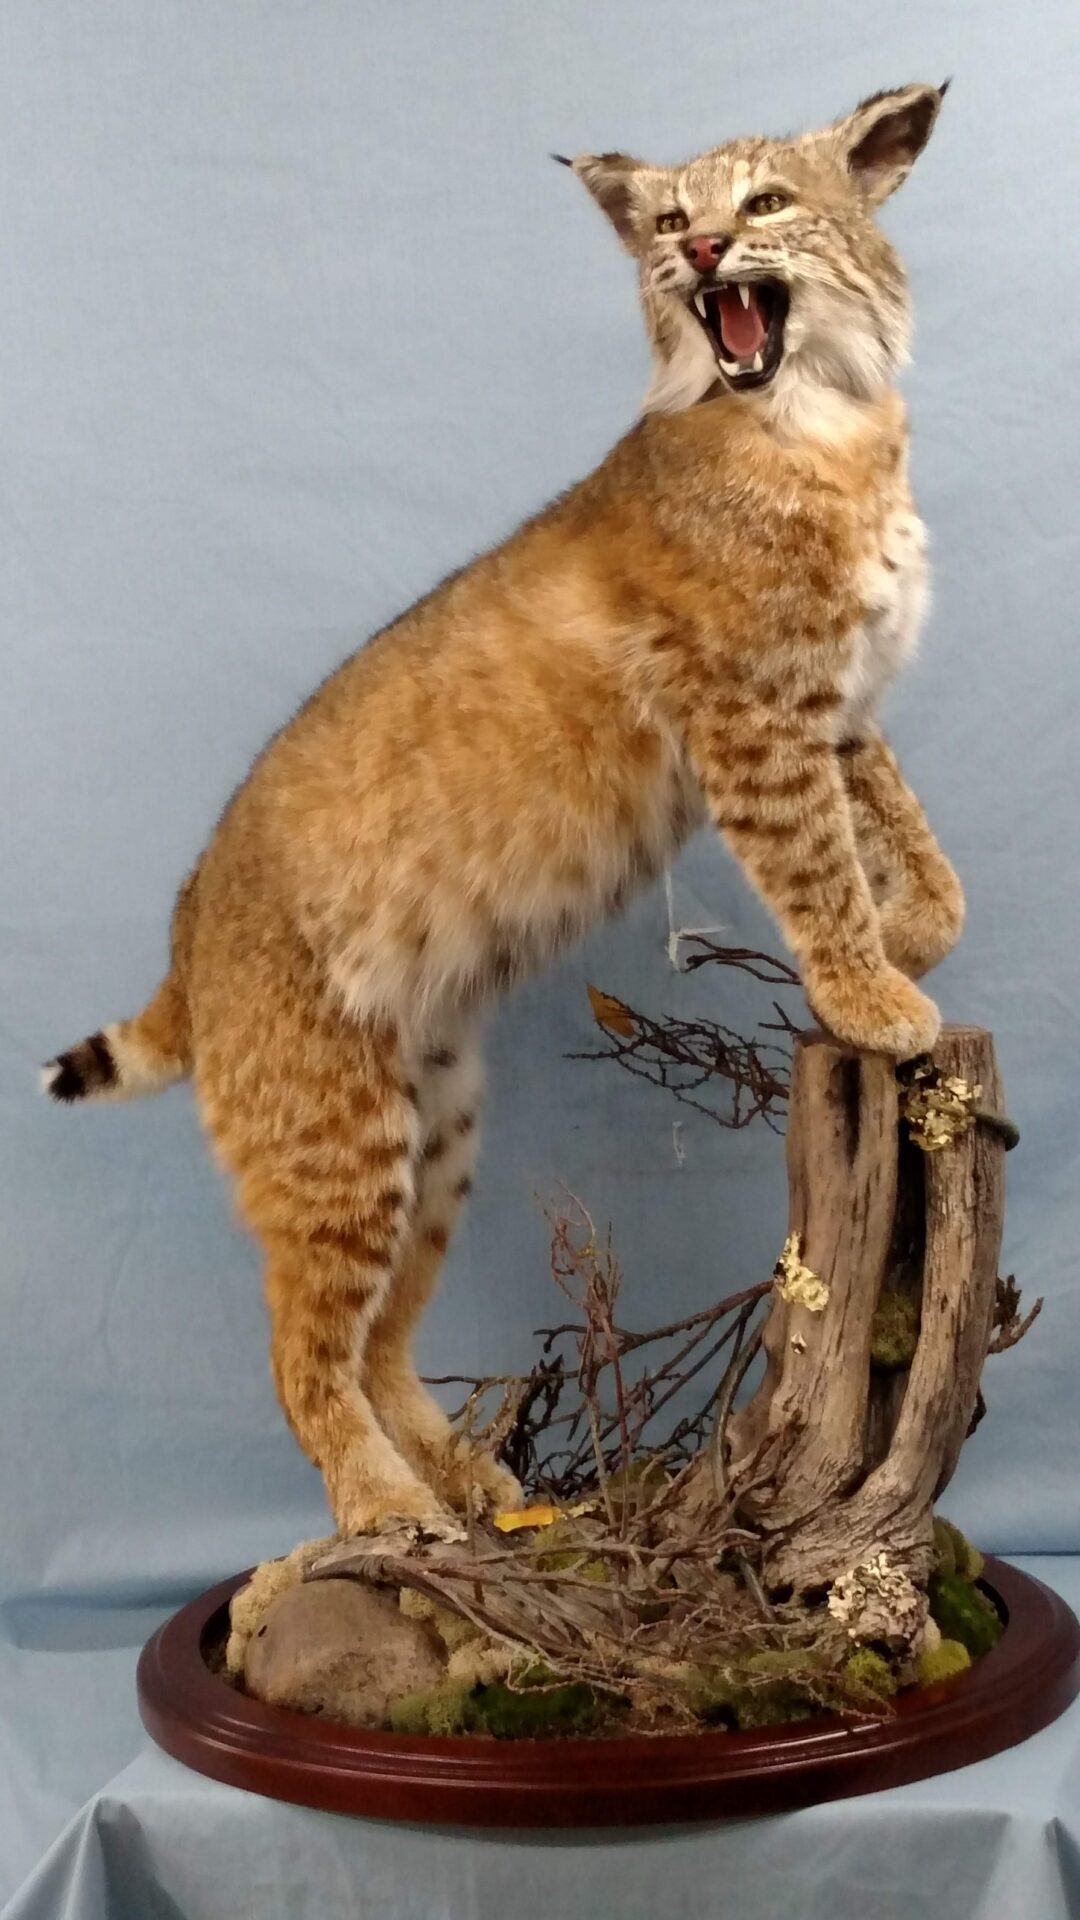 This Cat Taxidermy is calling out to people at the gallery